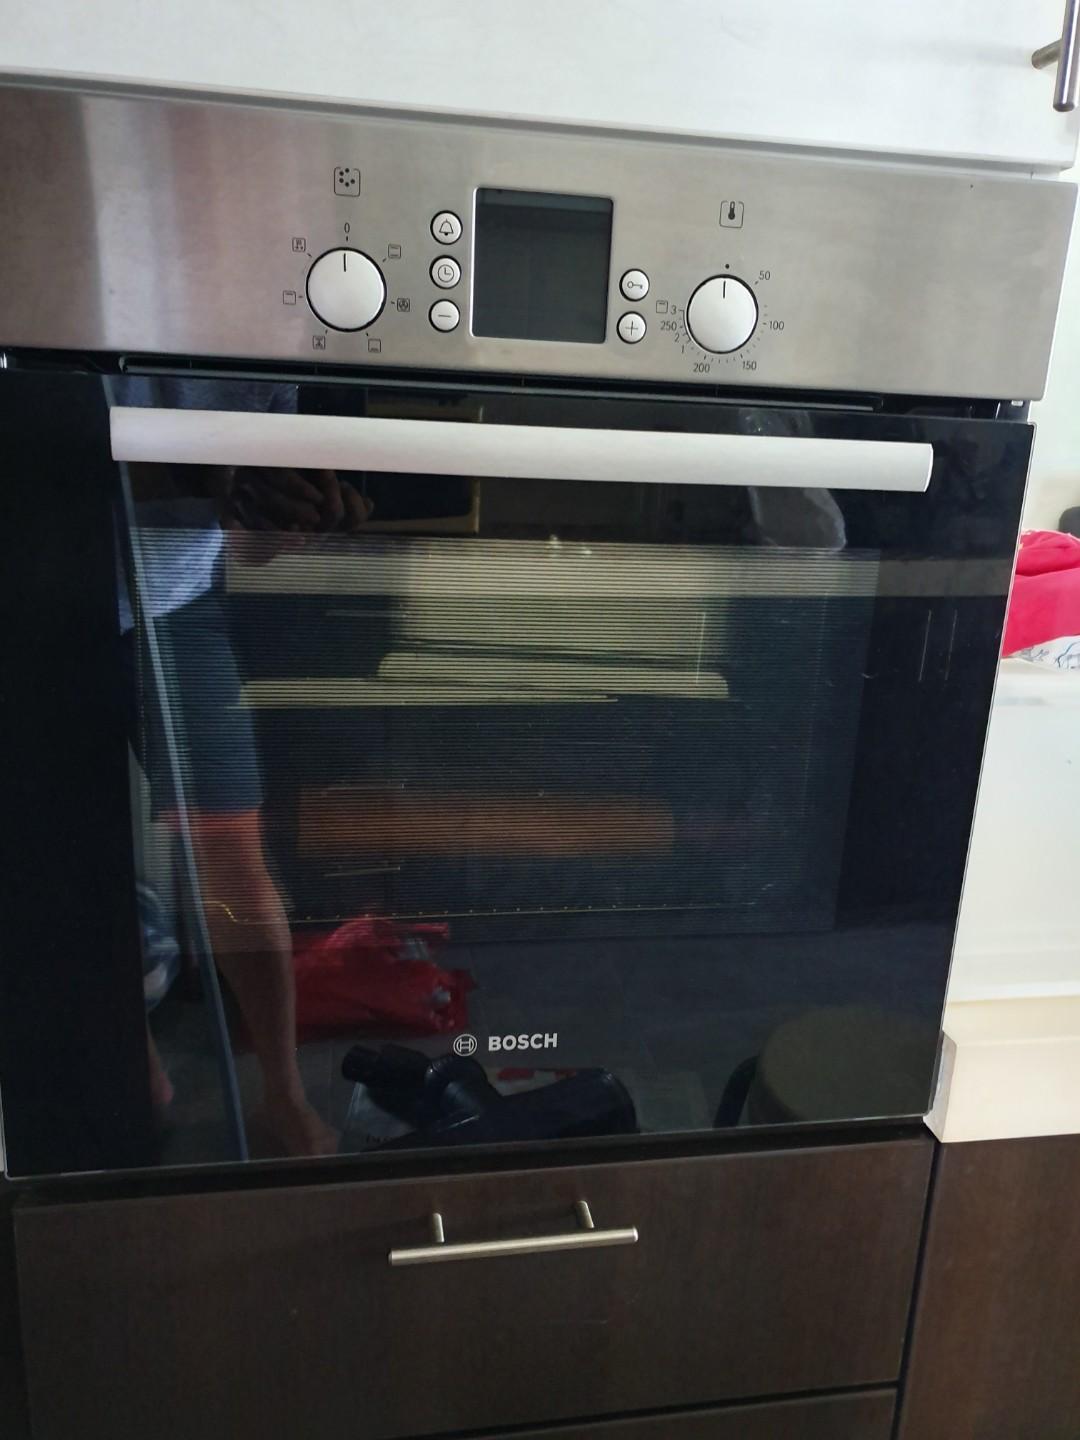 Bosch Built In Oven Home Appliances Kitchenware On Carousell